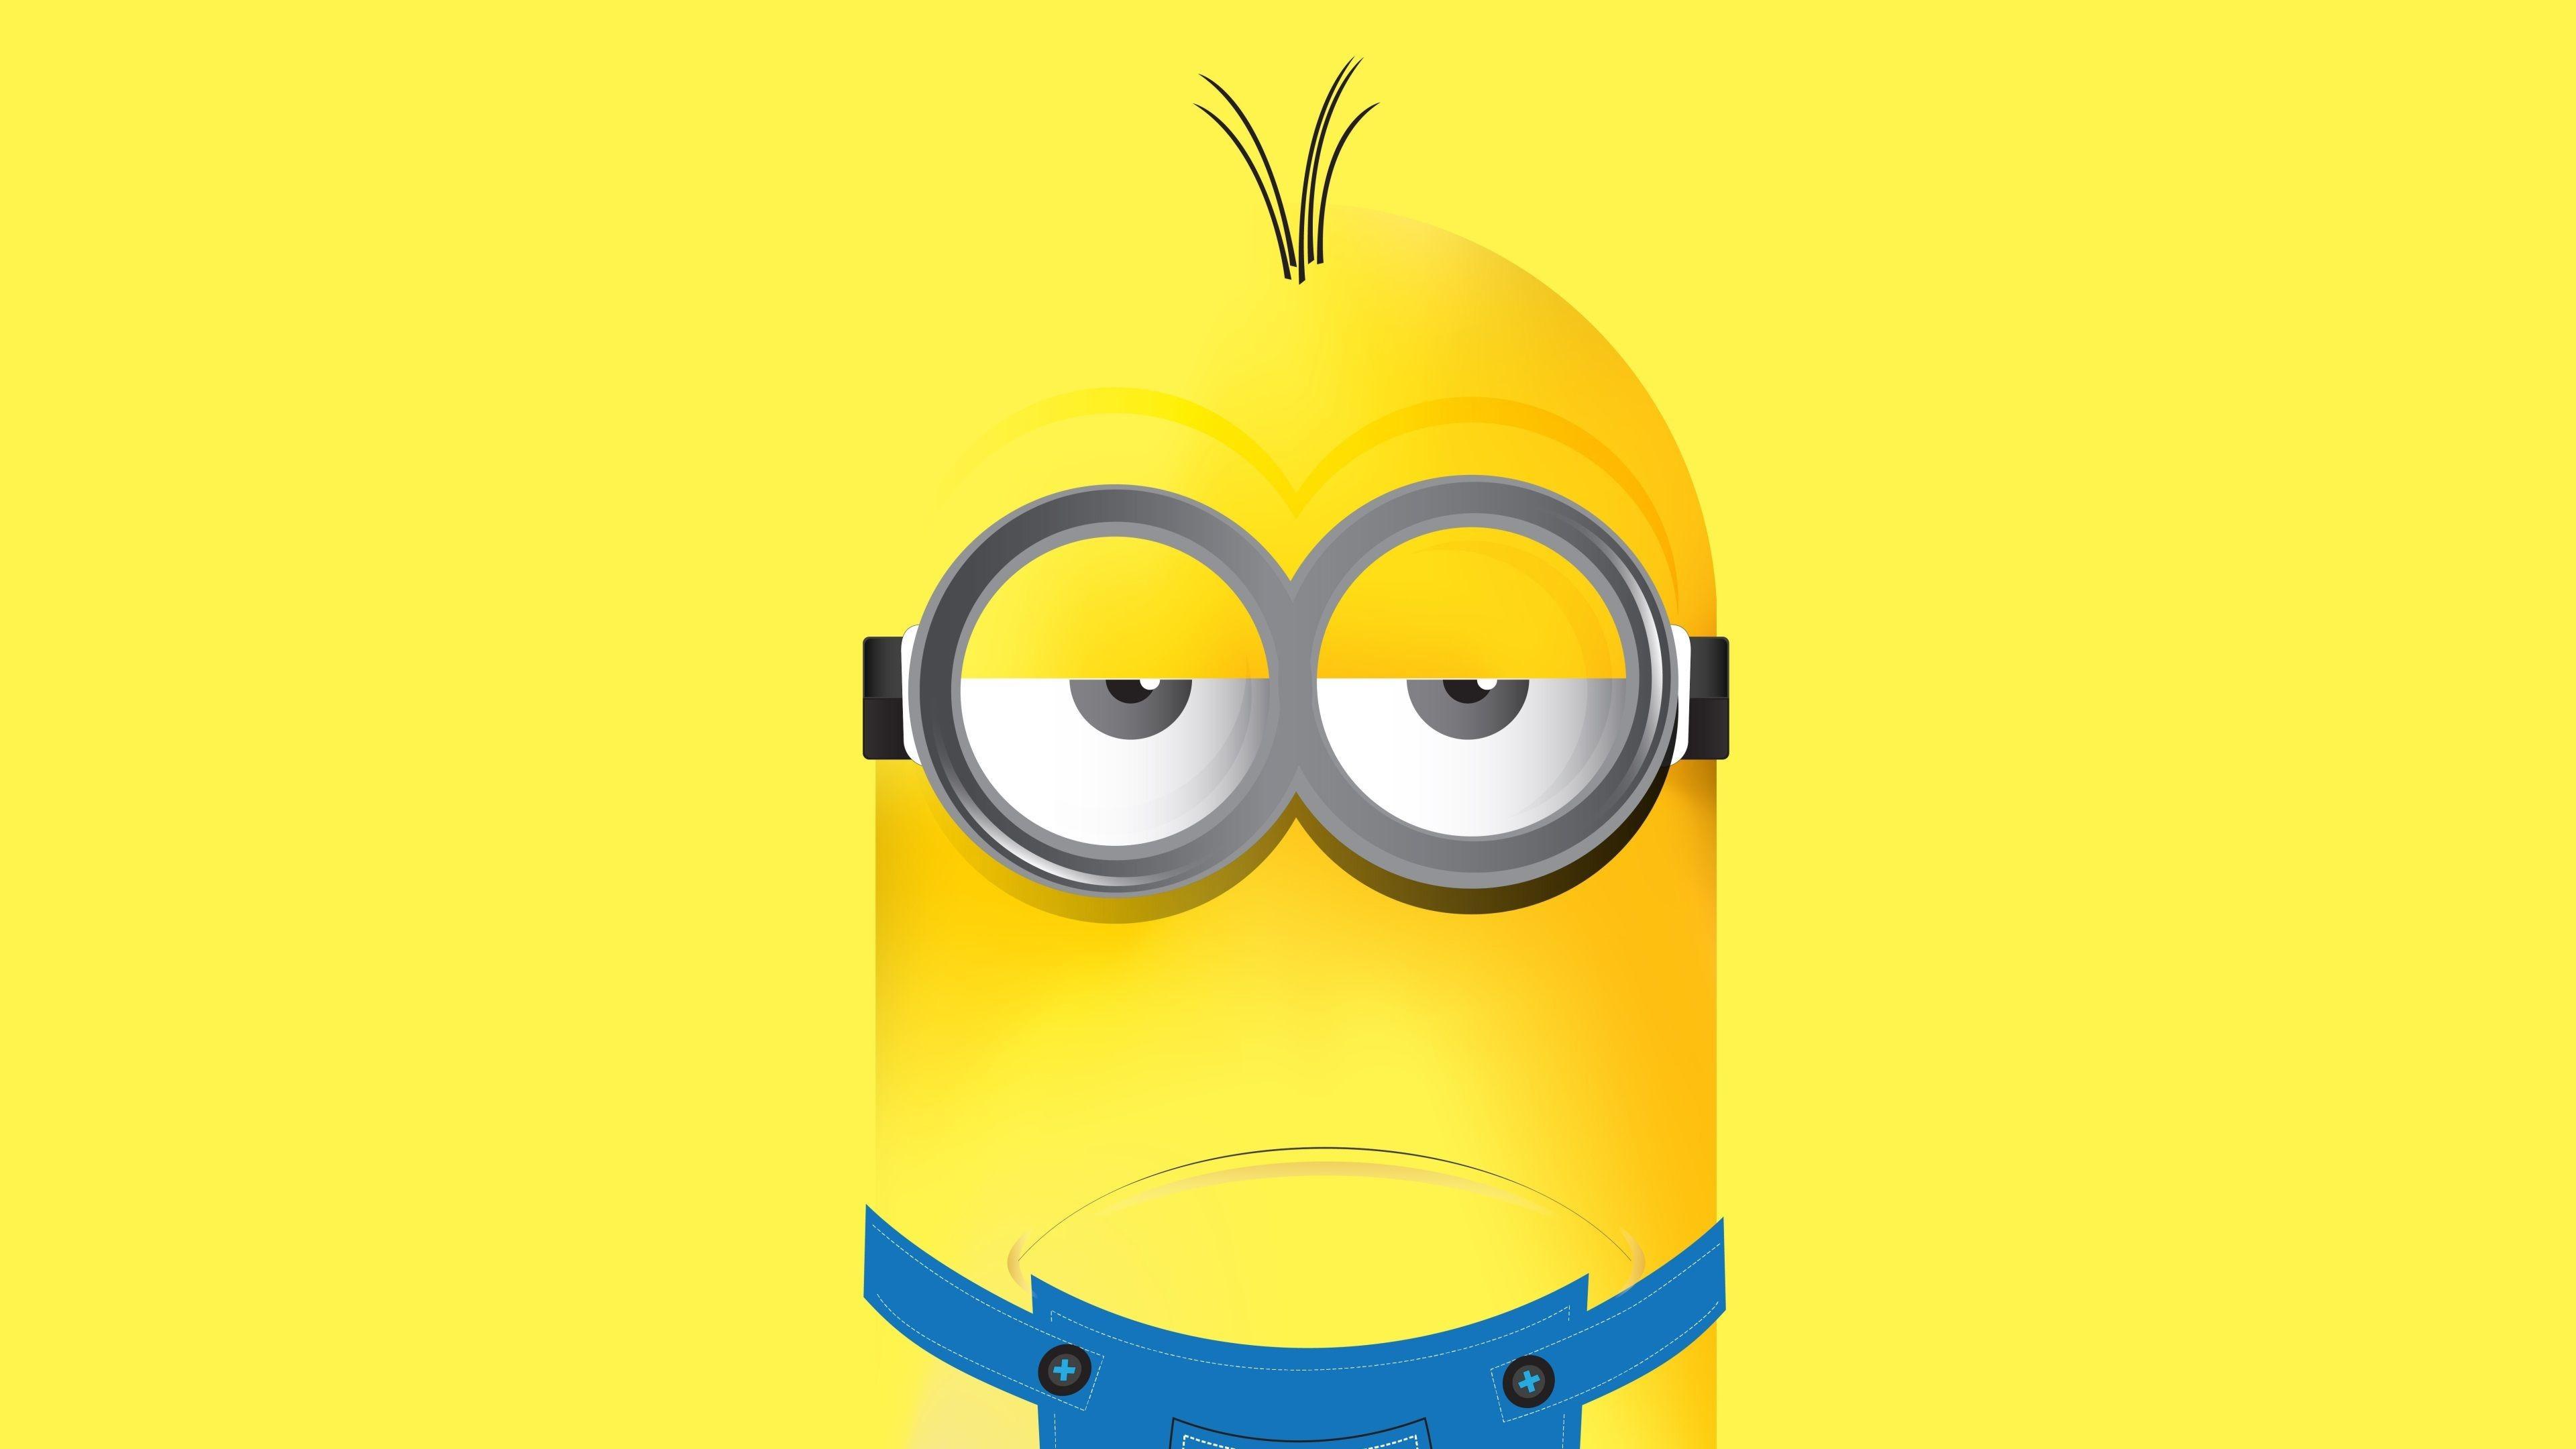 Minions download the new